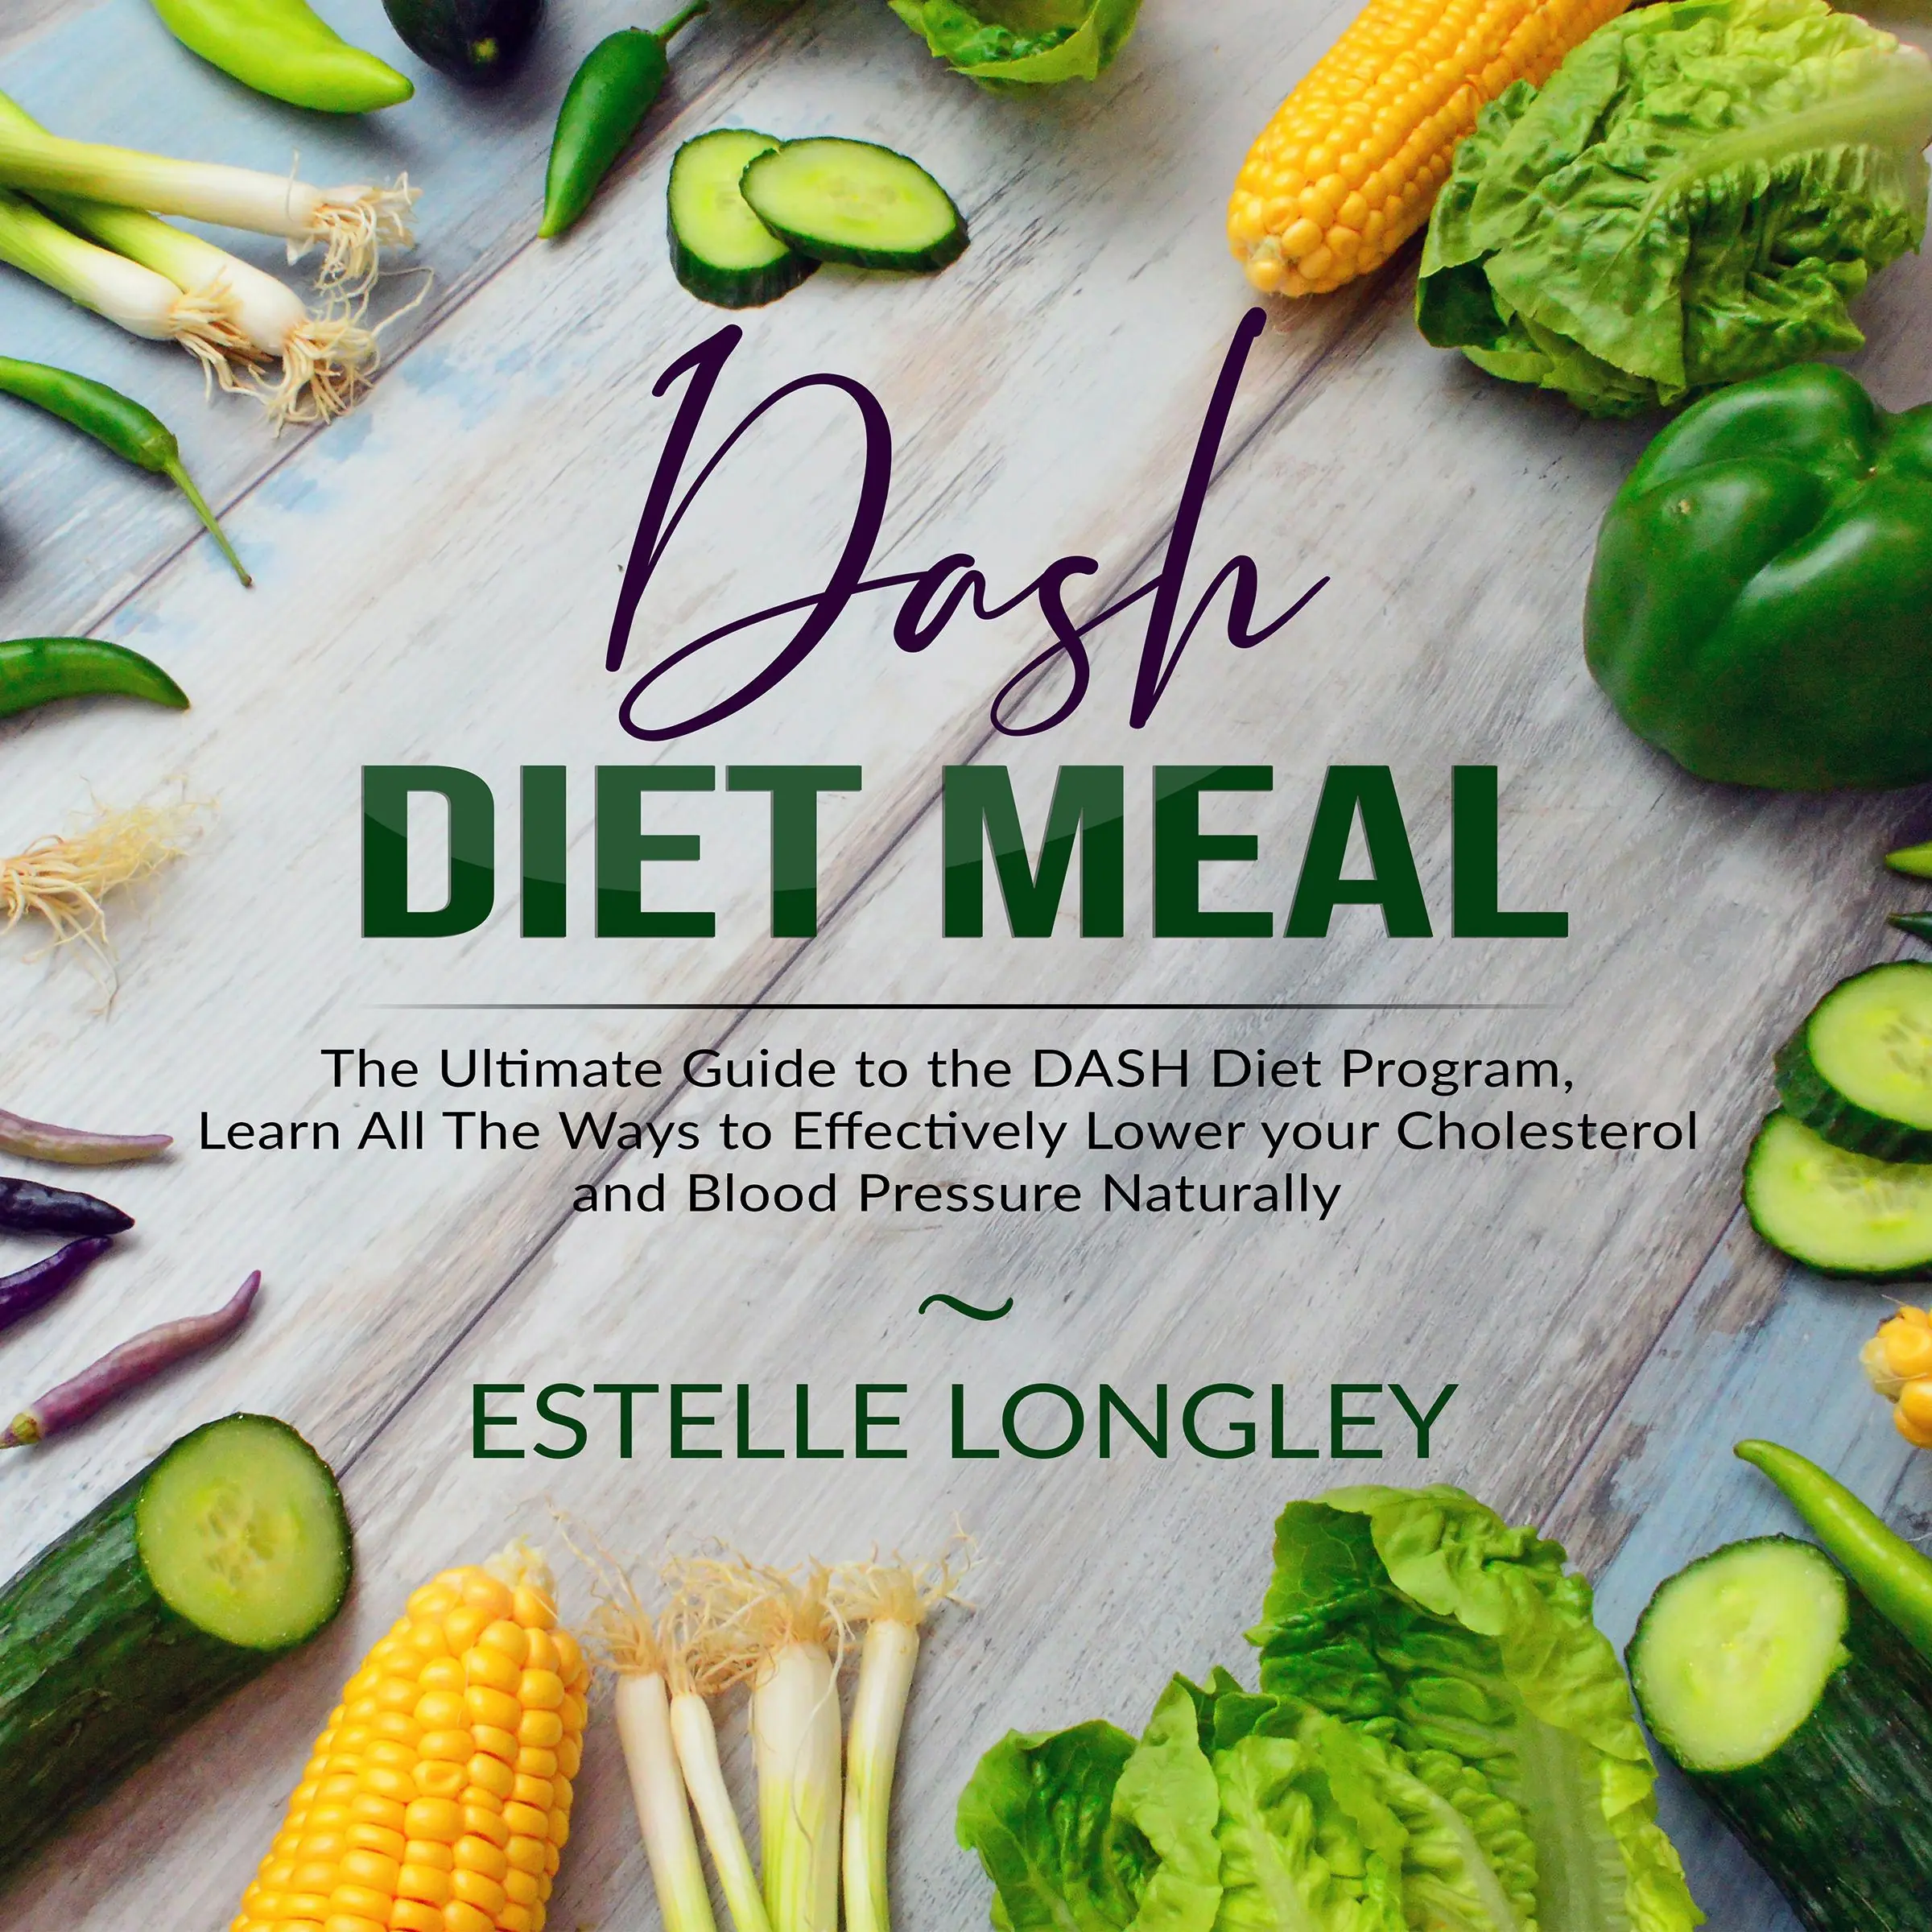 DASH Diet Meal: The Ultimate Guide to the DASH Diet Program, Learn All The Ways to Effectively Lower your Cholesterol and Blood Pressure Naturally Audiobook by Estelle Longley